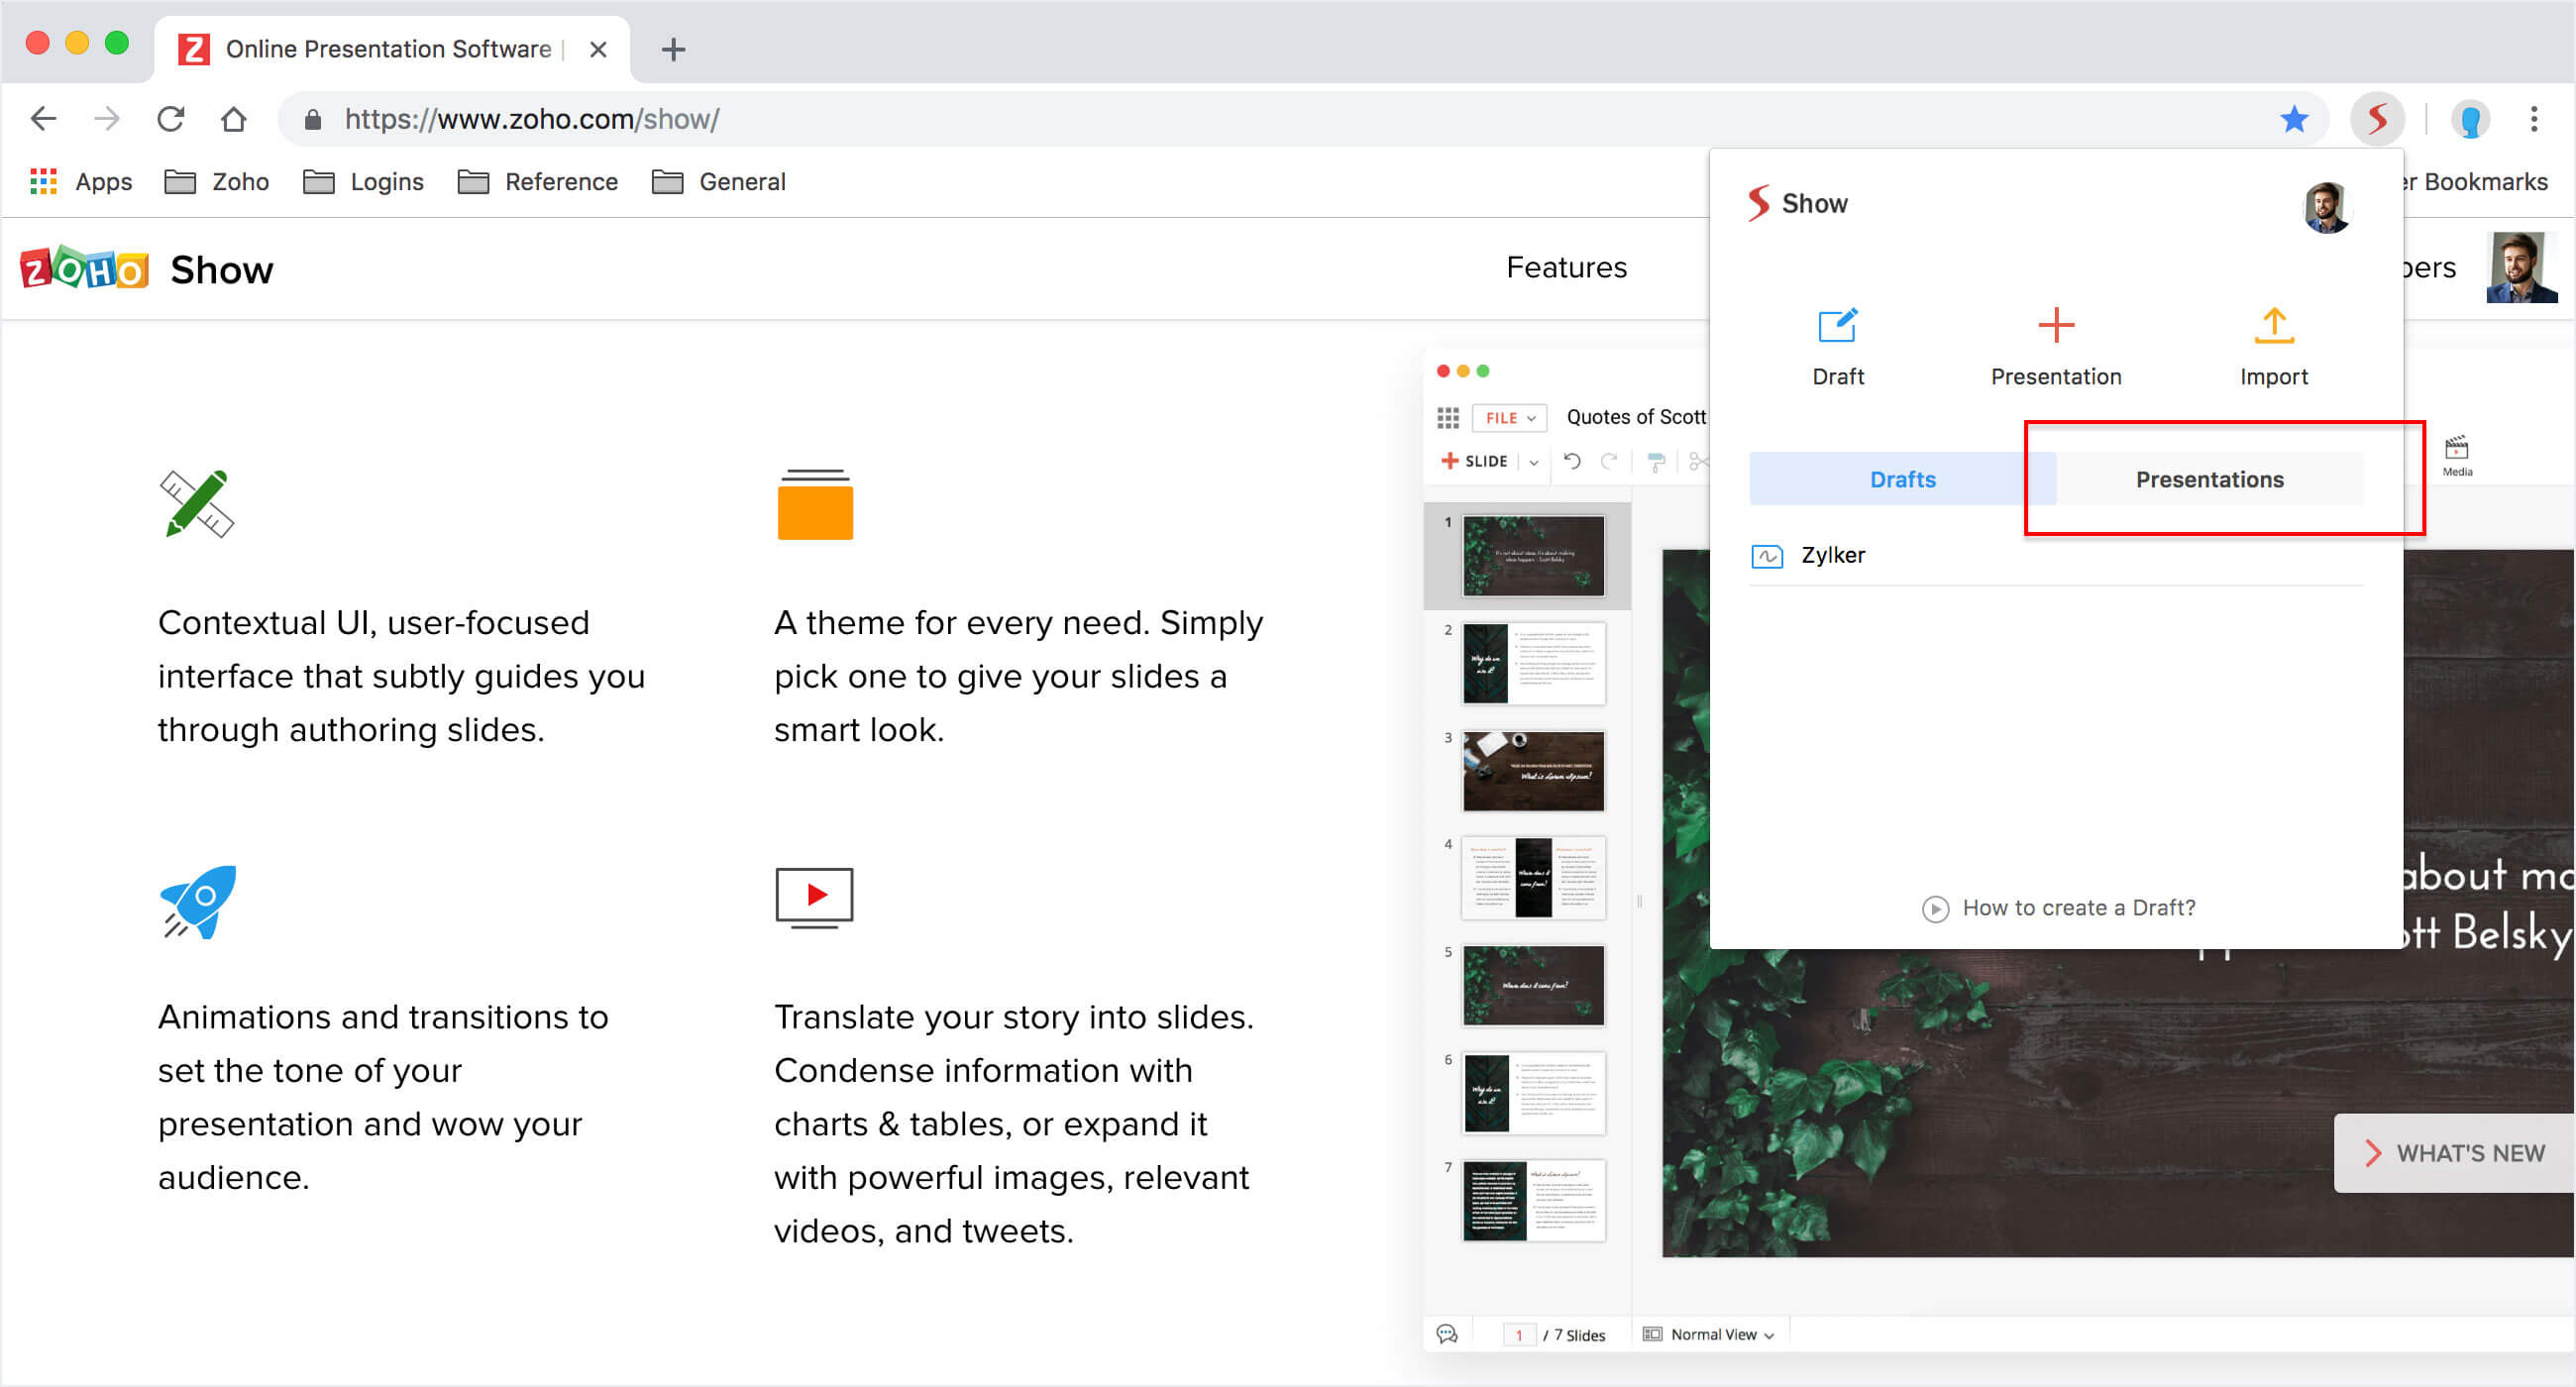 Presentations list in Zoho Show extension.